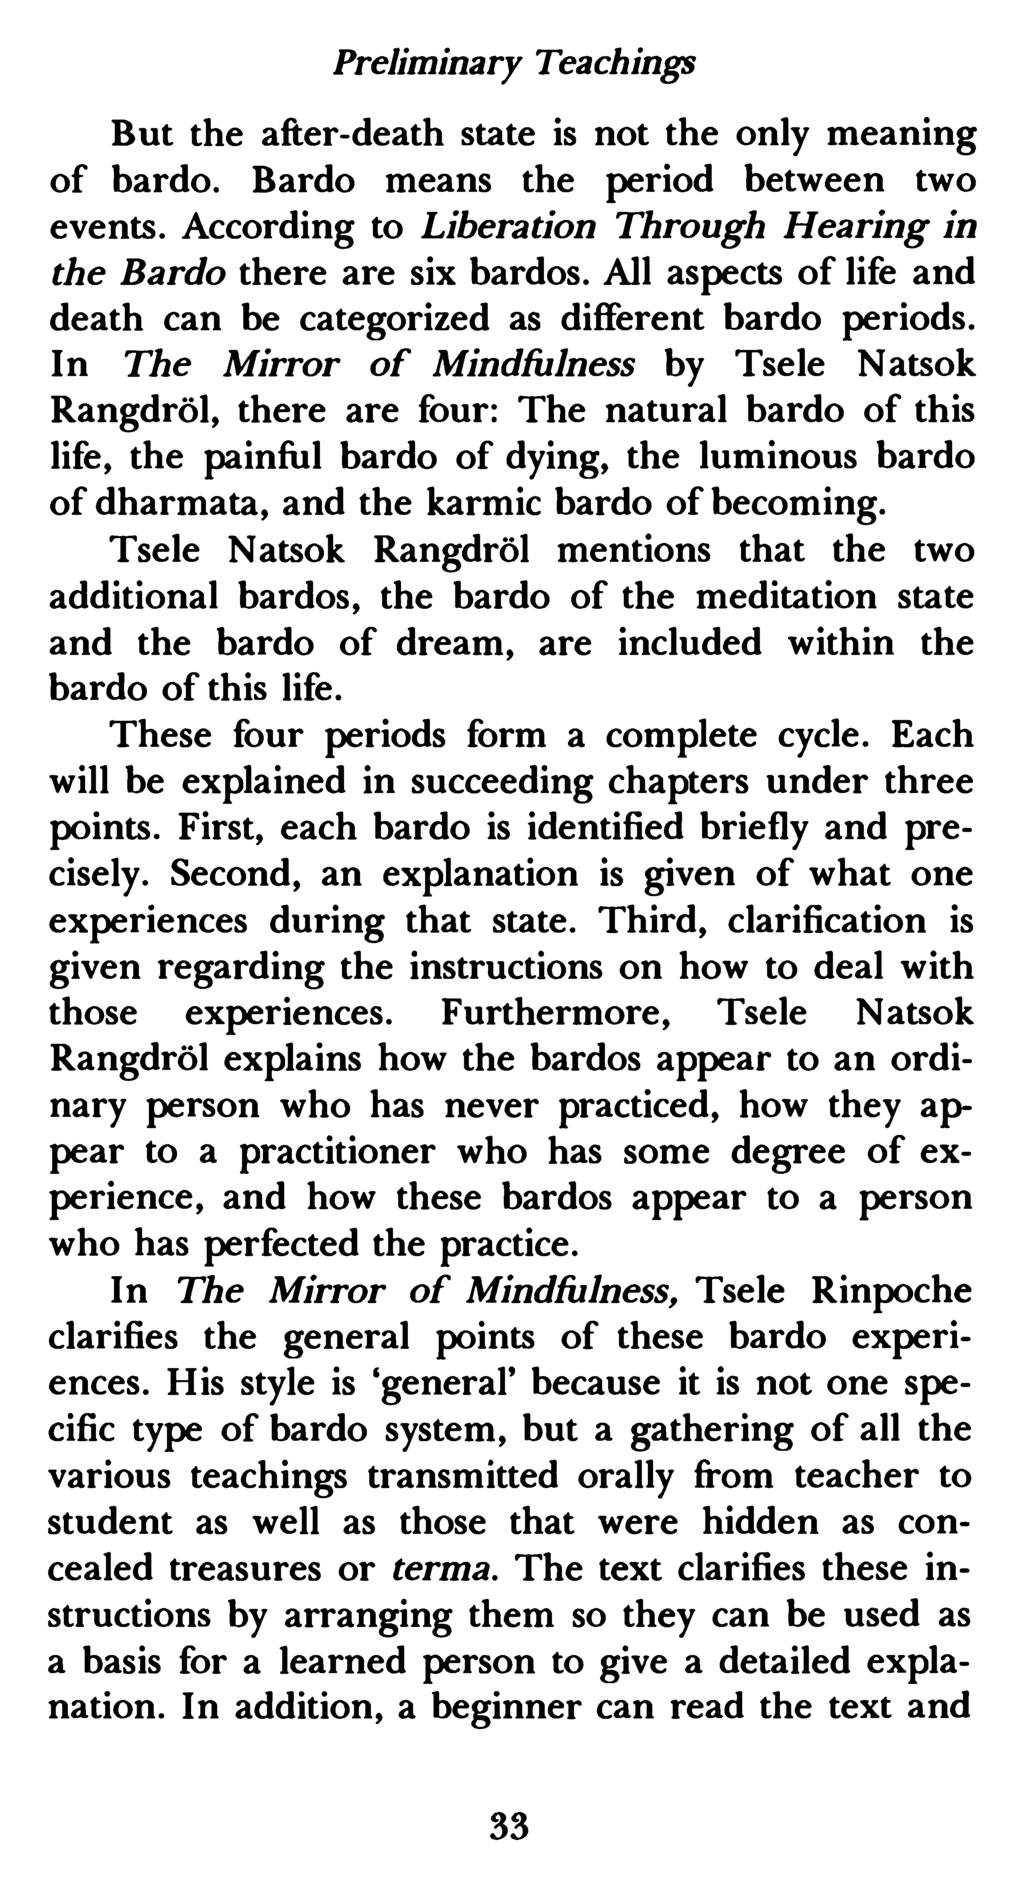 Preliminary Teachings But the after-death state is not the only meaning of bardo. Bardo means the period between two events. According to Liberation Through Hearing in the Bardo there are six bardos.